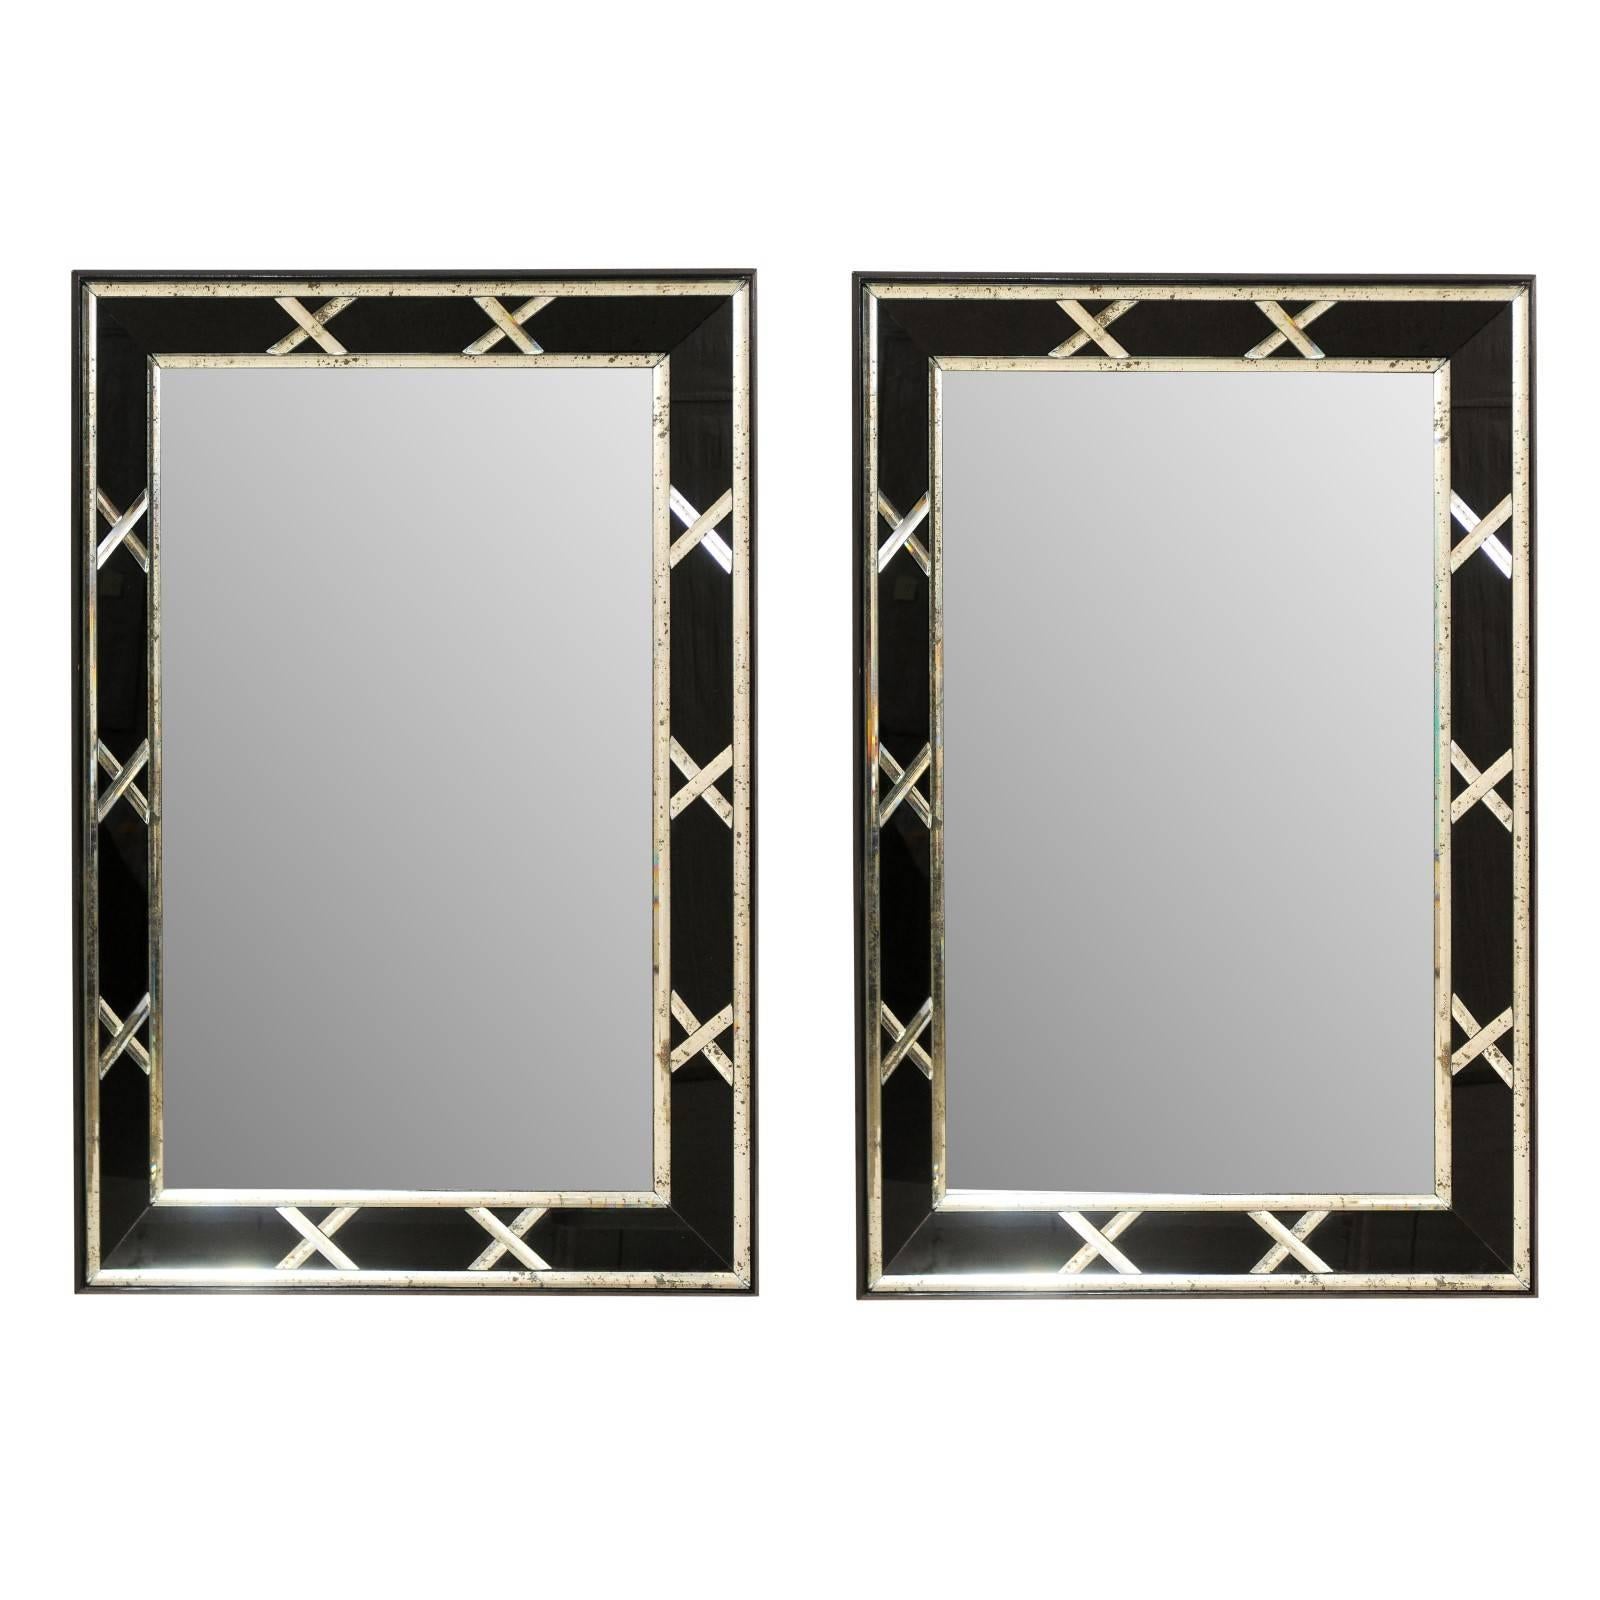 Pair of Tall Silver and Black X-Pattern Vintage Mirrors